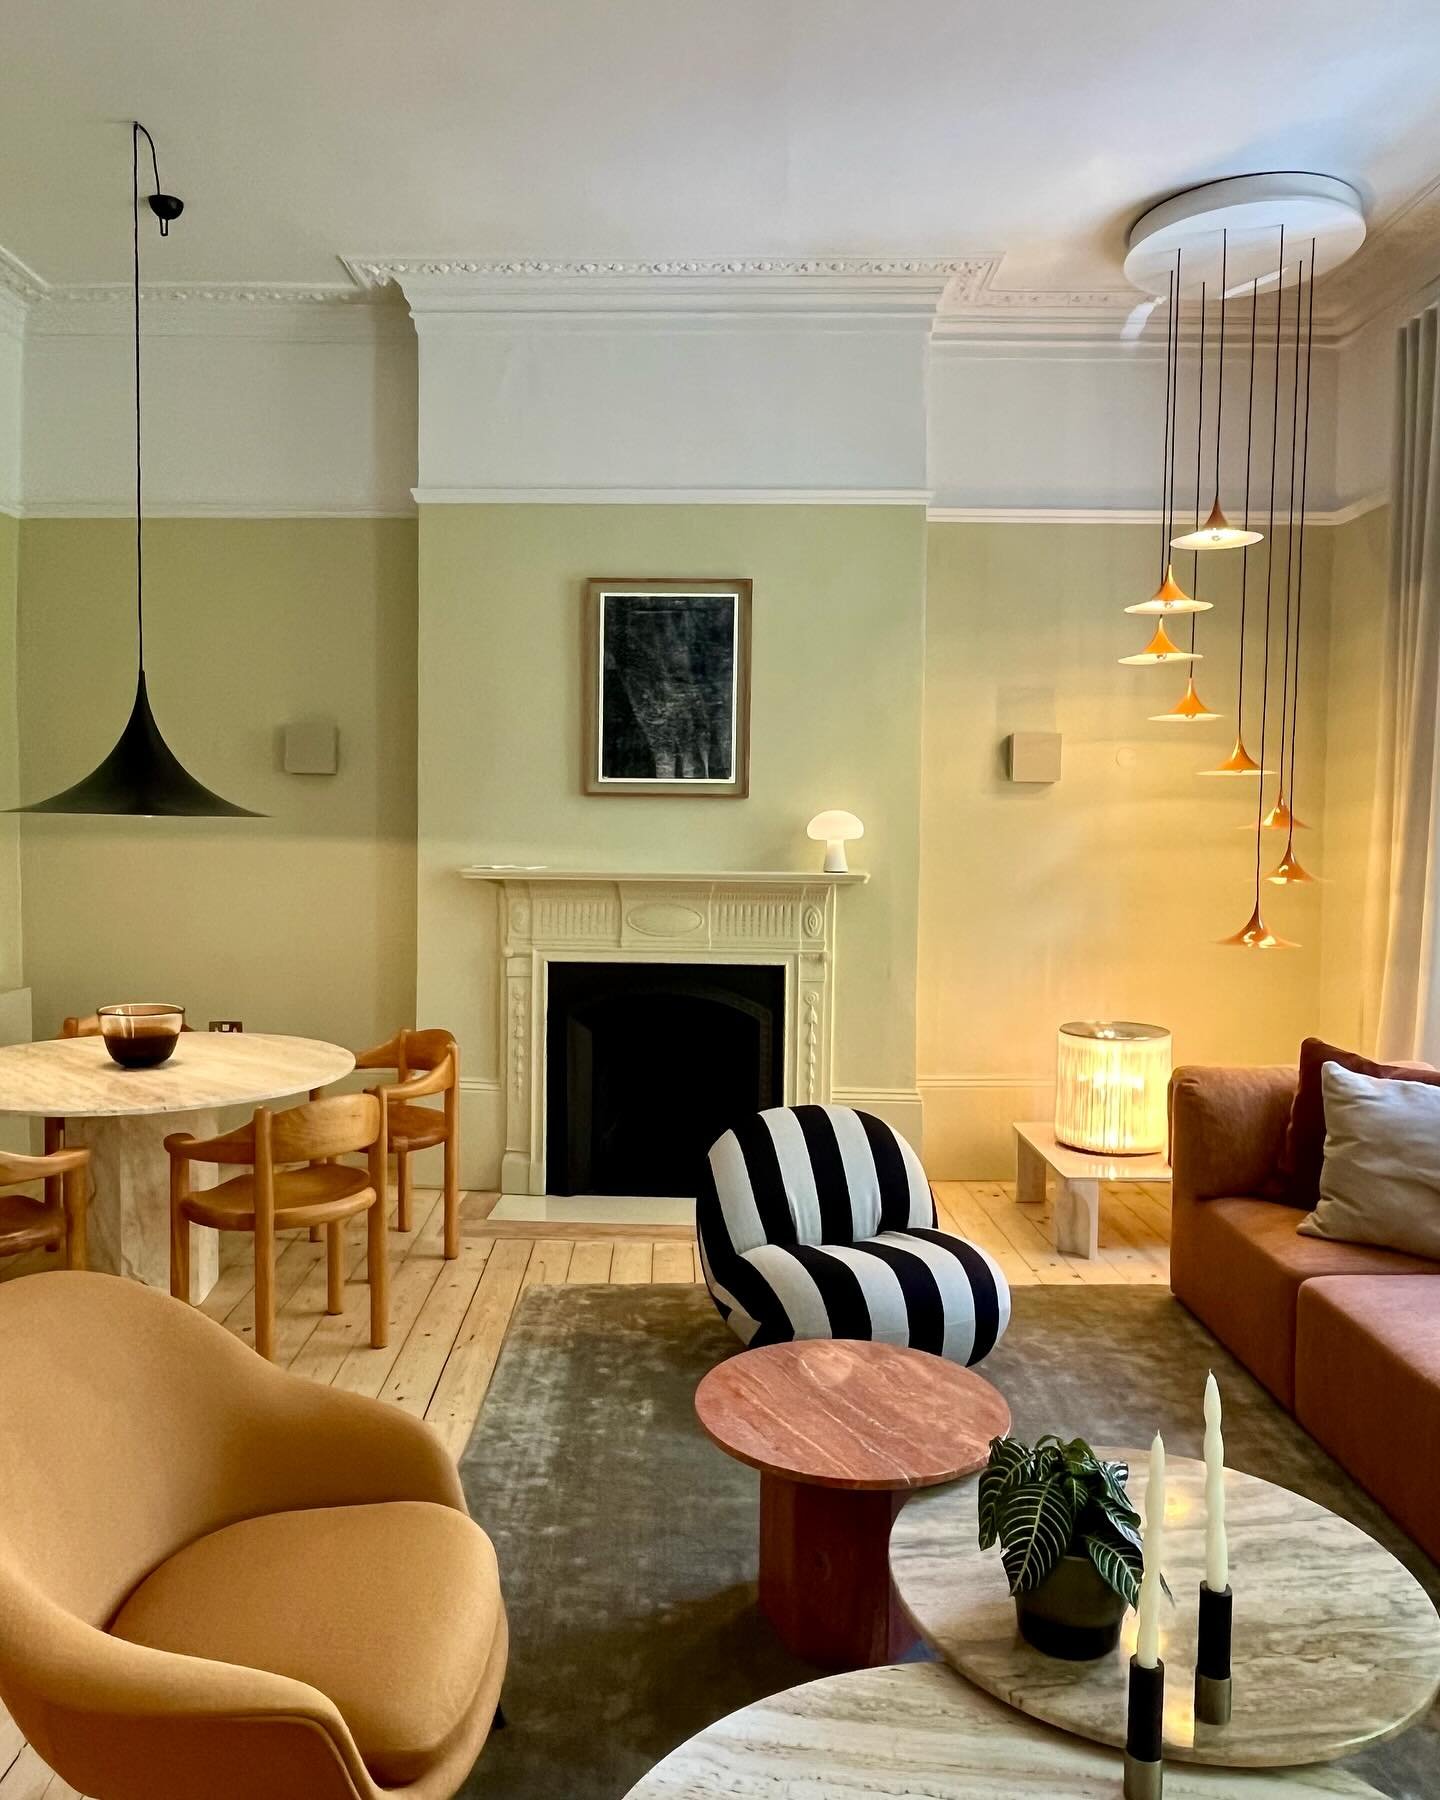 The new London @gubiofficial showroom is a stunner! Set in a gorgeous period townhouse in Clerkenwell it&rsquo;s a feast for the senses. What a space 🙌🏼

~ 
#gubi #gubihouselondon #showroom #townhouse #clerkenwell #interiors #scandinaviandesign #da